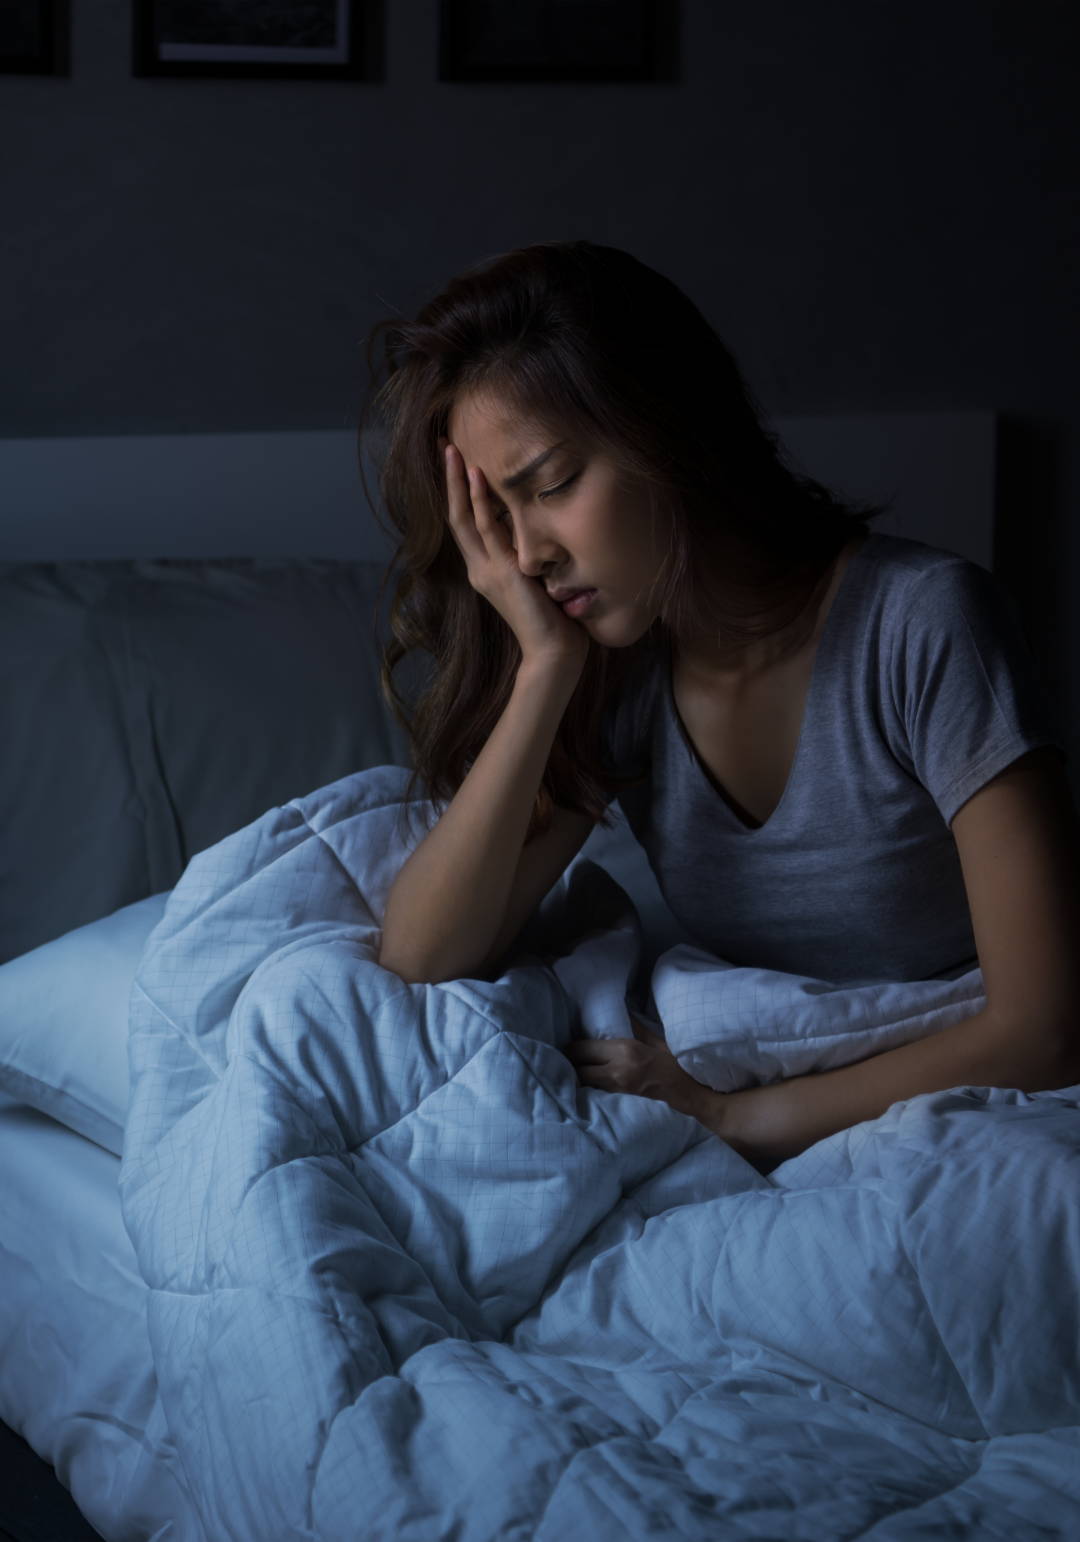 Woman having difficulty sleeping at 2:20AM